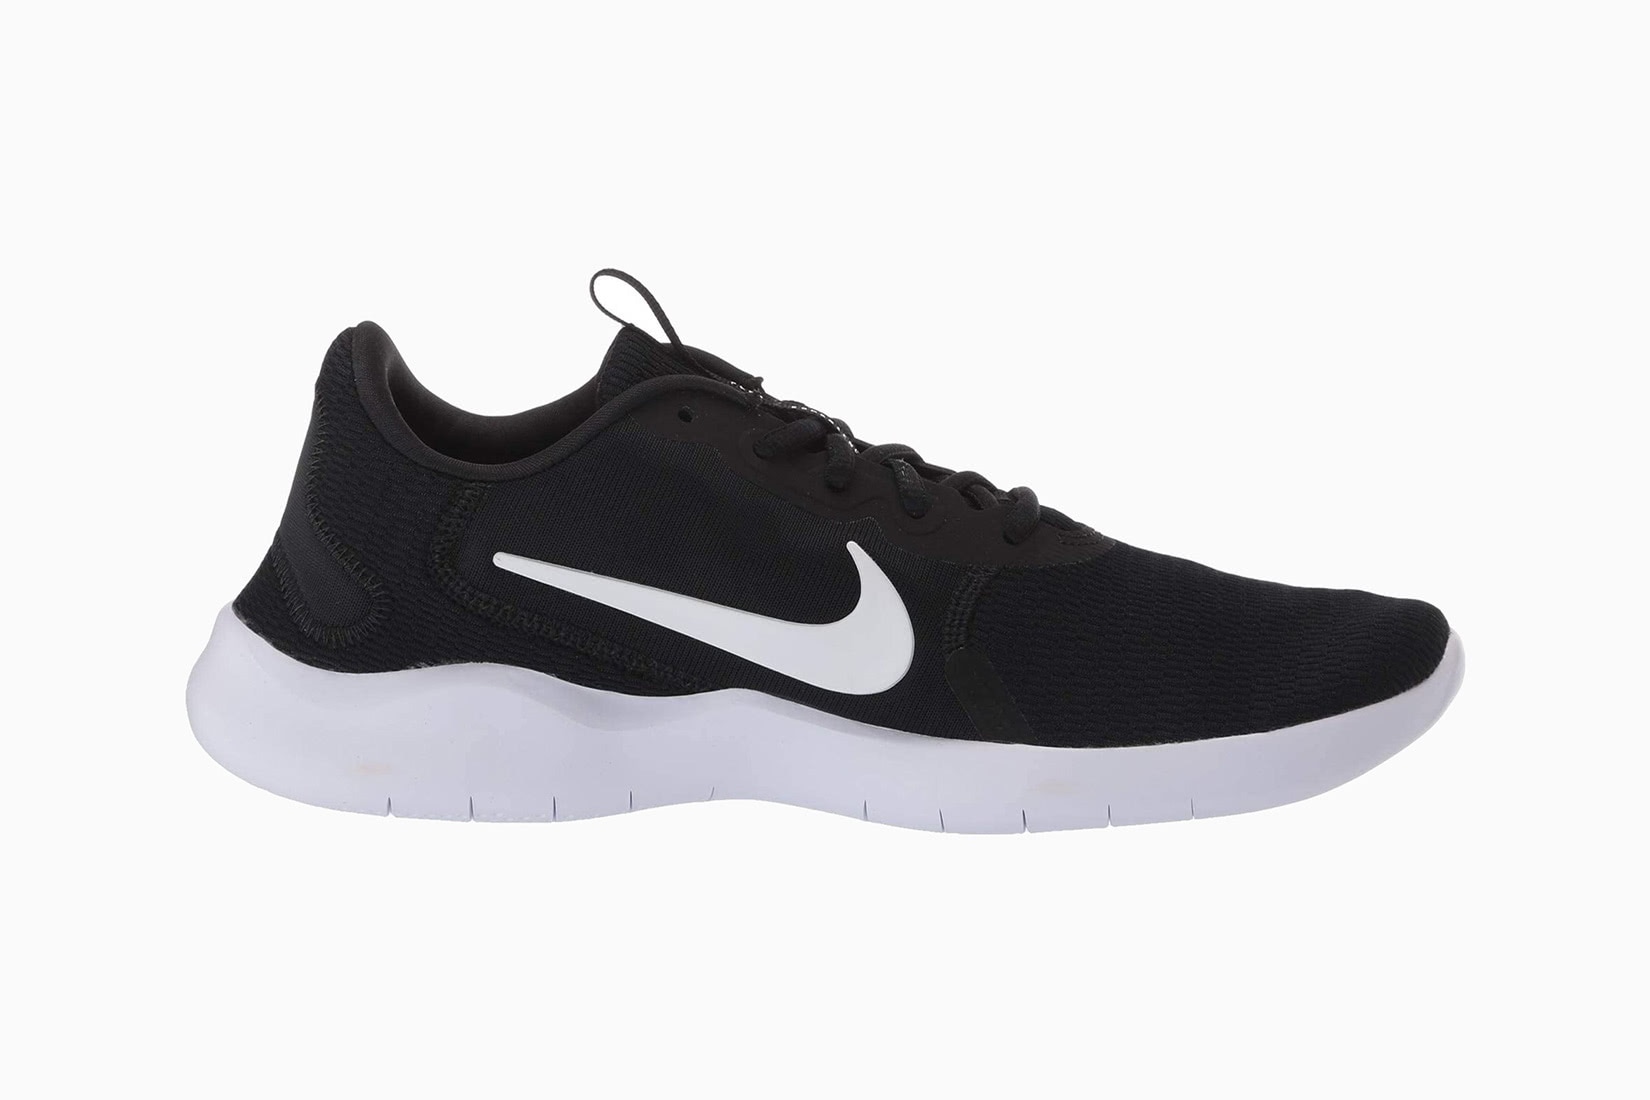 nike shoes for standing all day women's